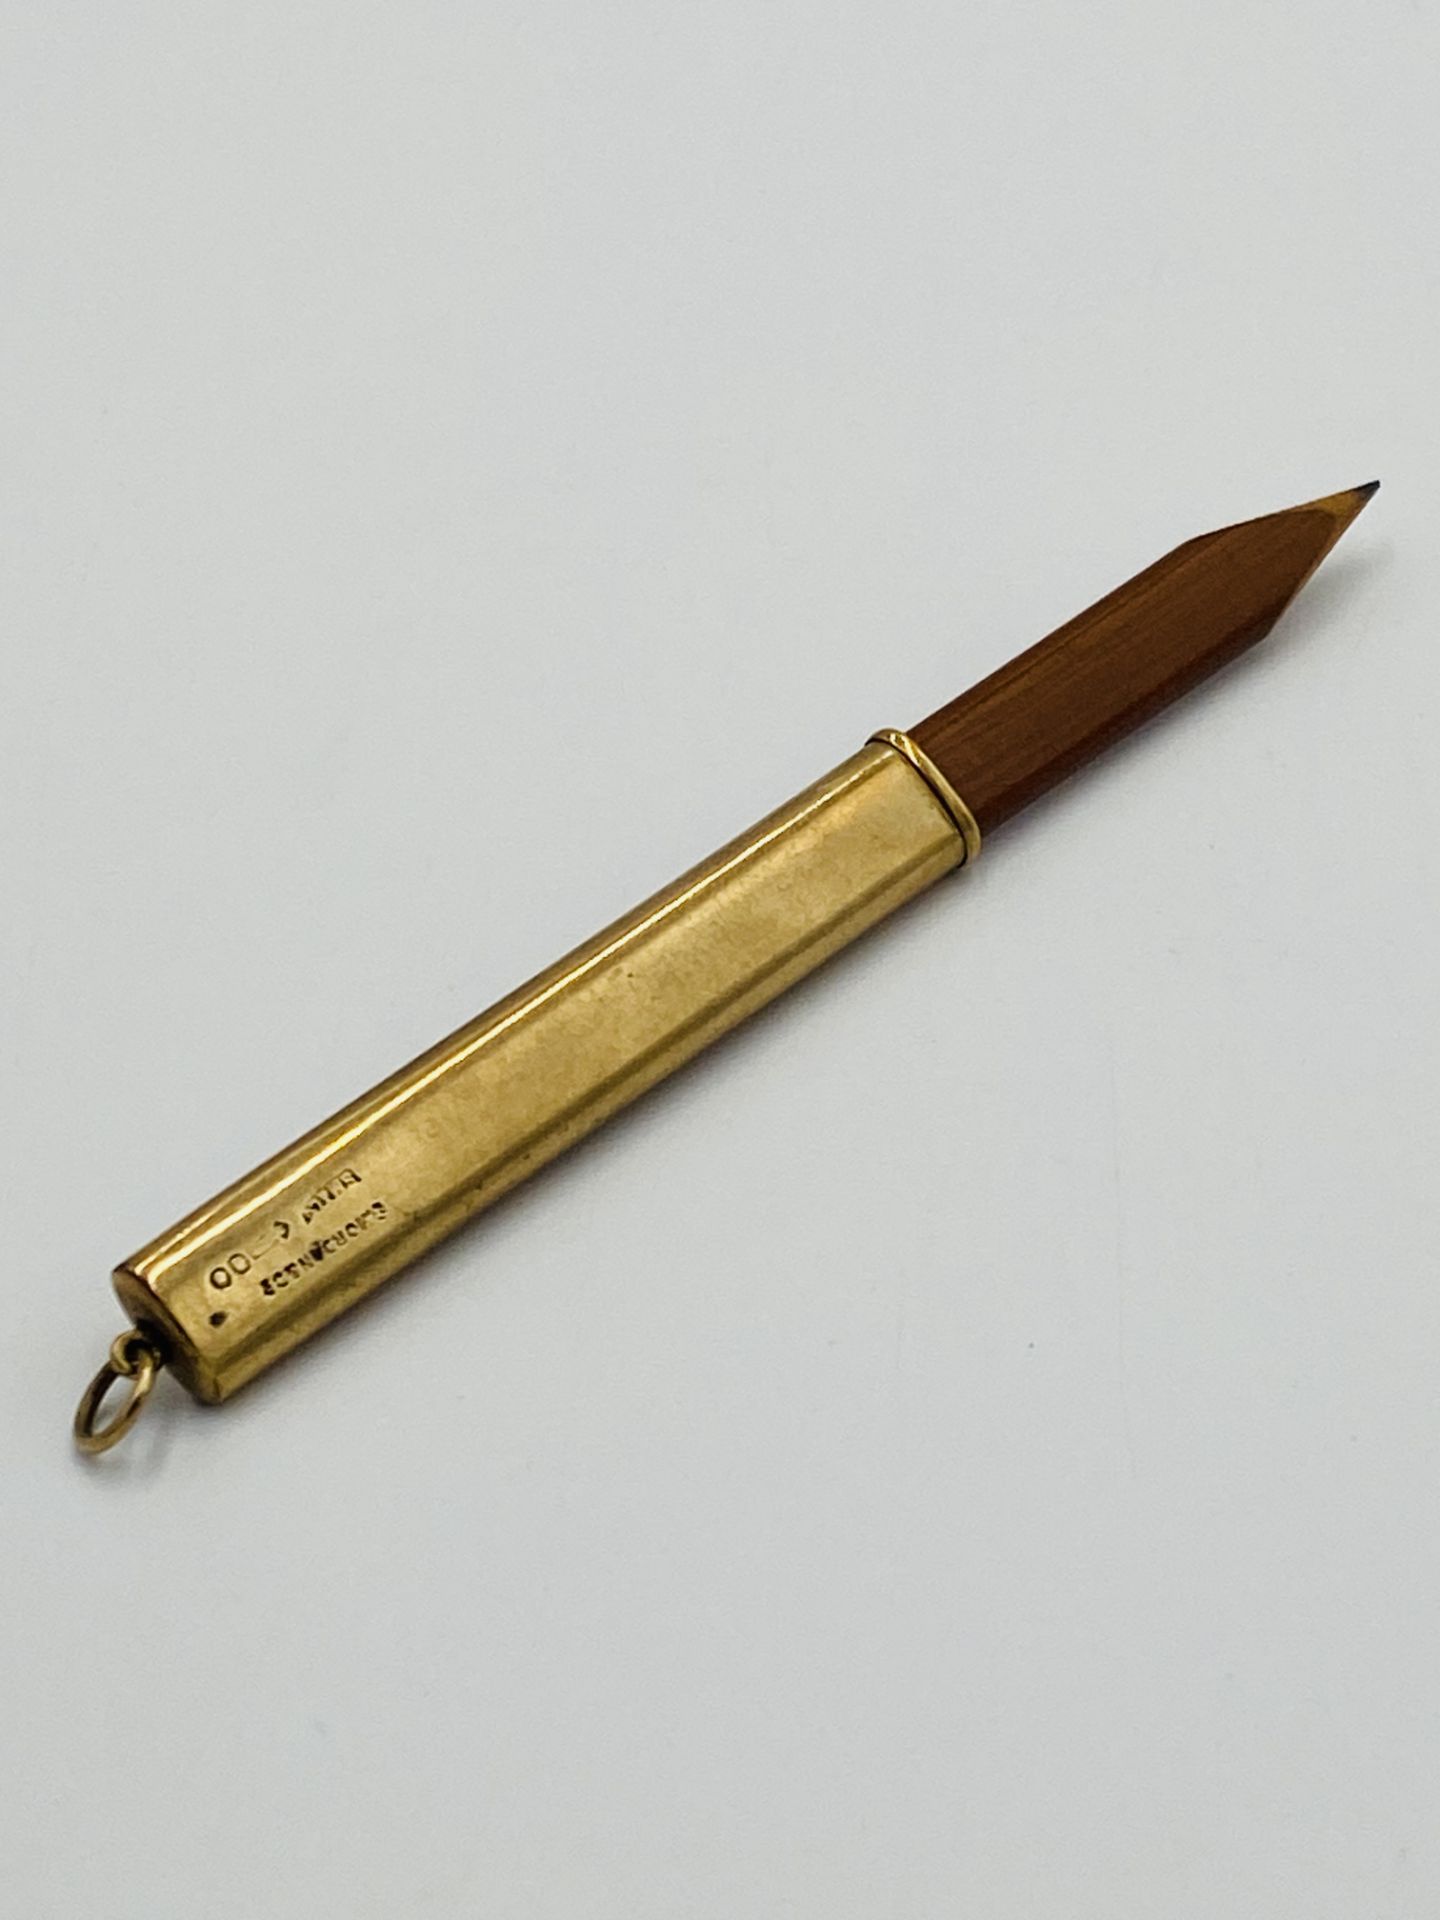 9ct gold propelling pencil - Image 2 of 6